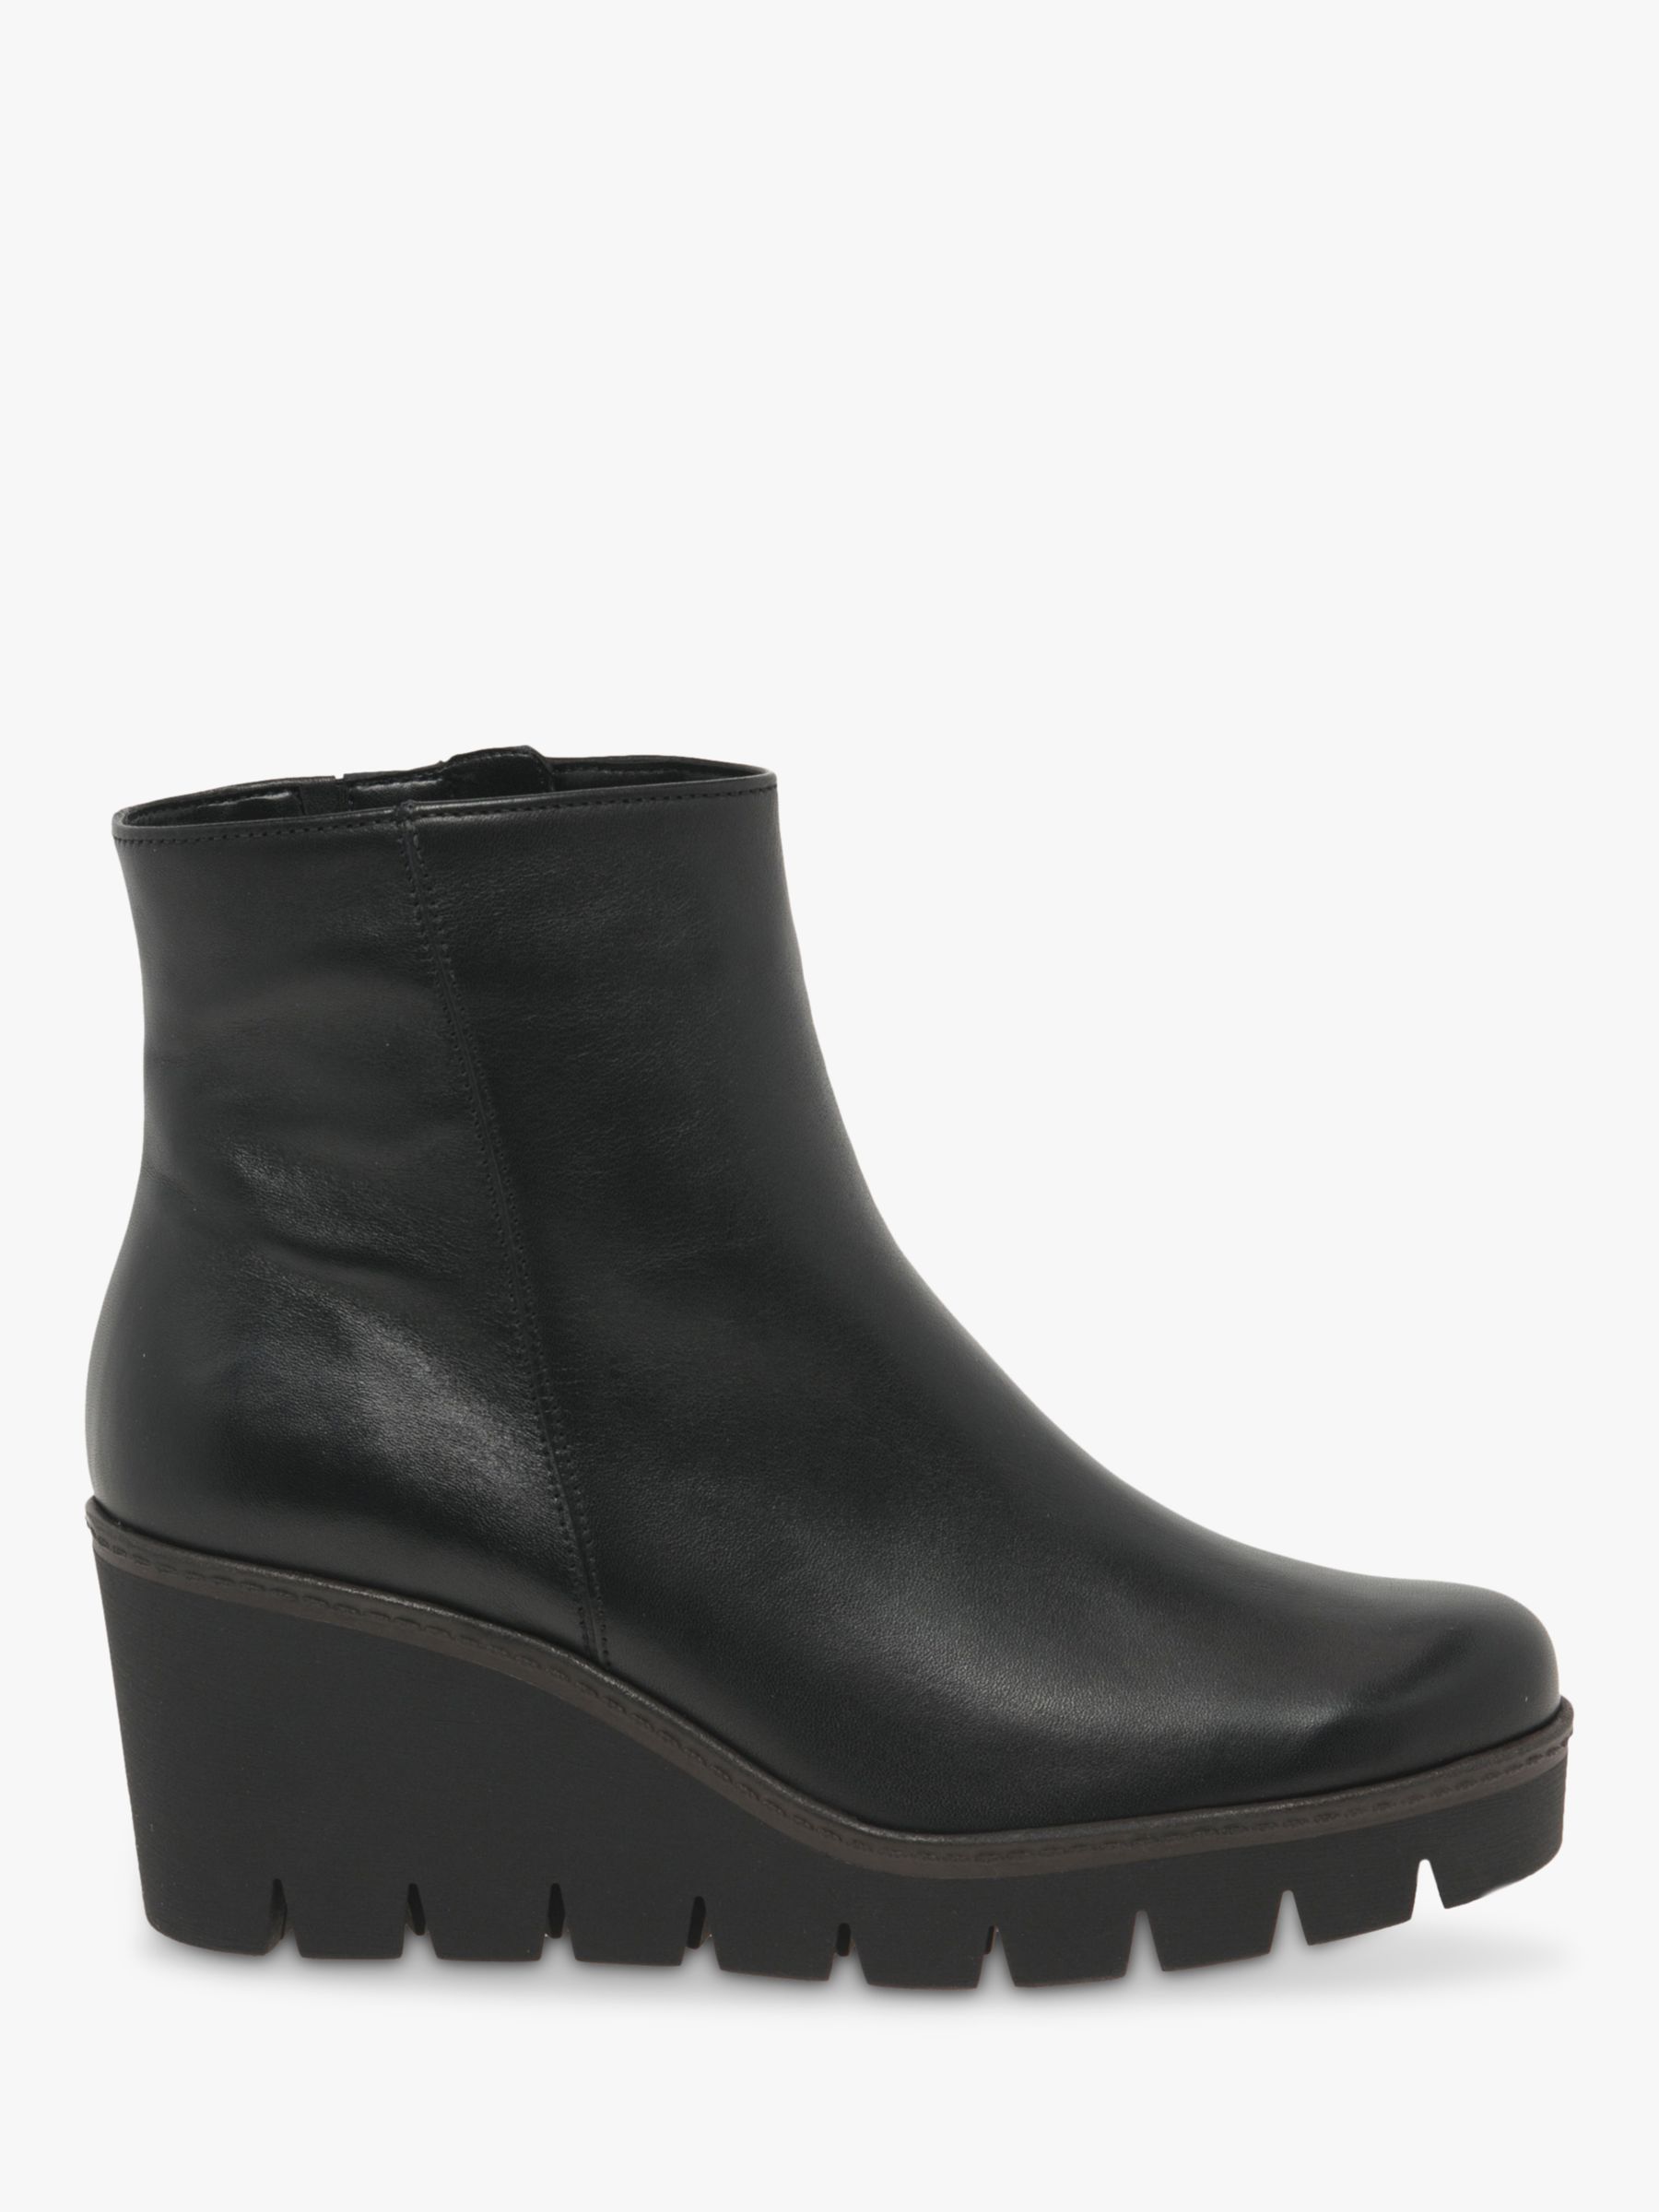 Gabor Utopia Leather Wedge Heeled Ankle Boots, Black at John Lewis ...